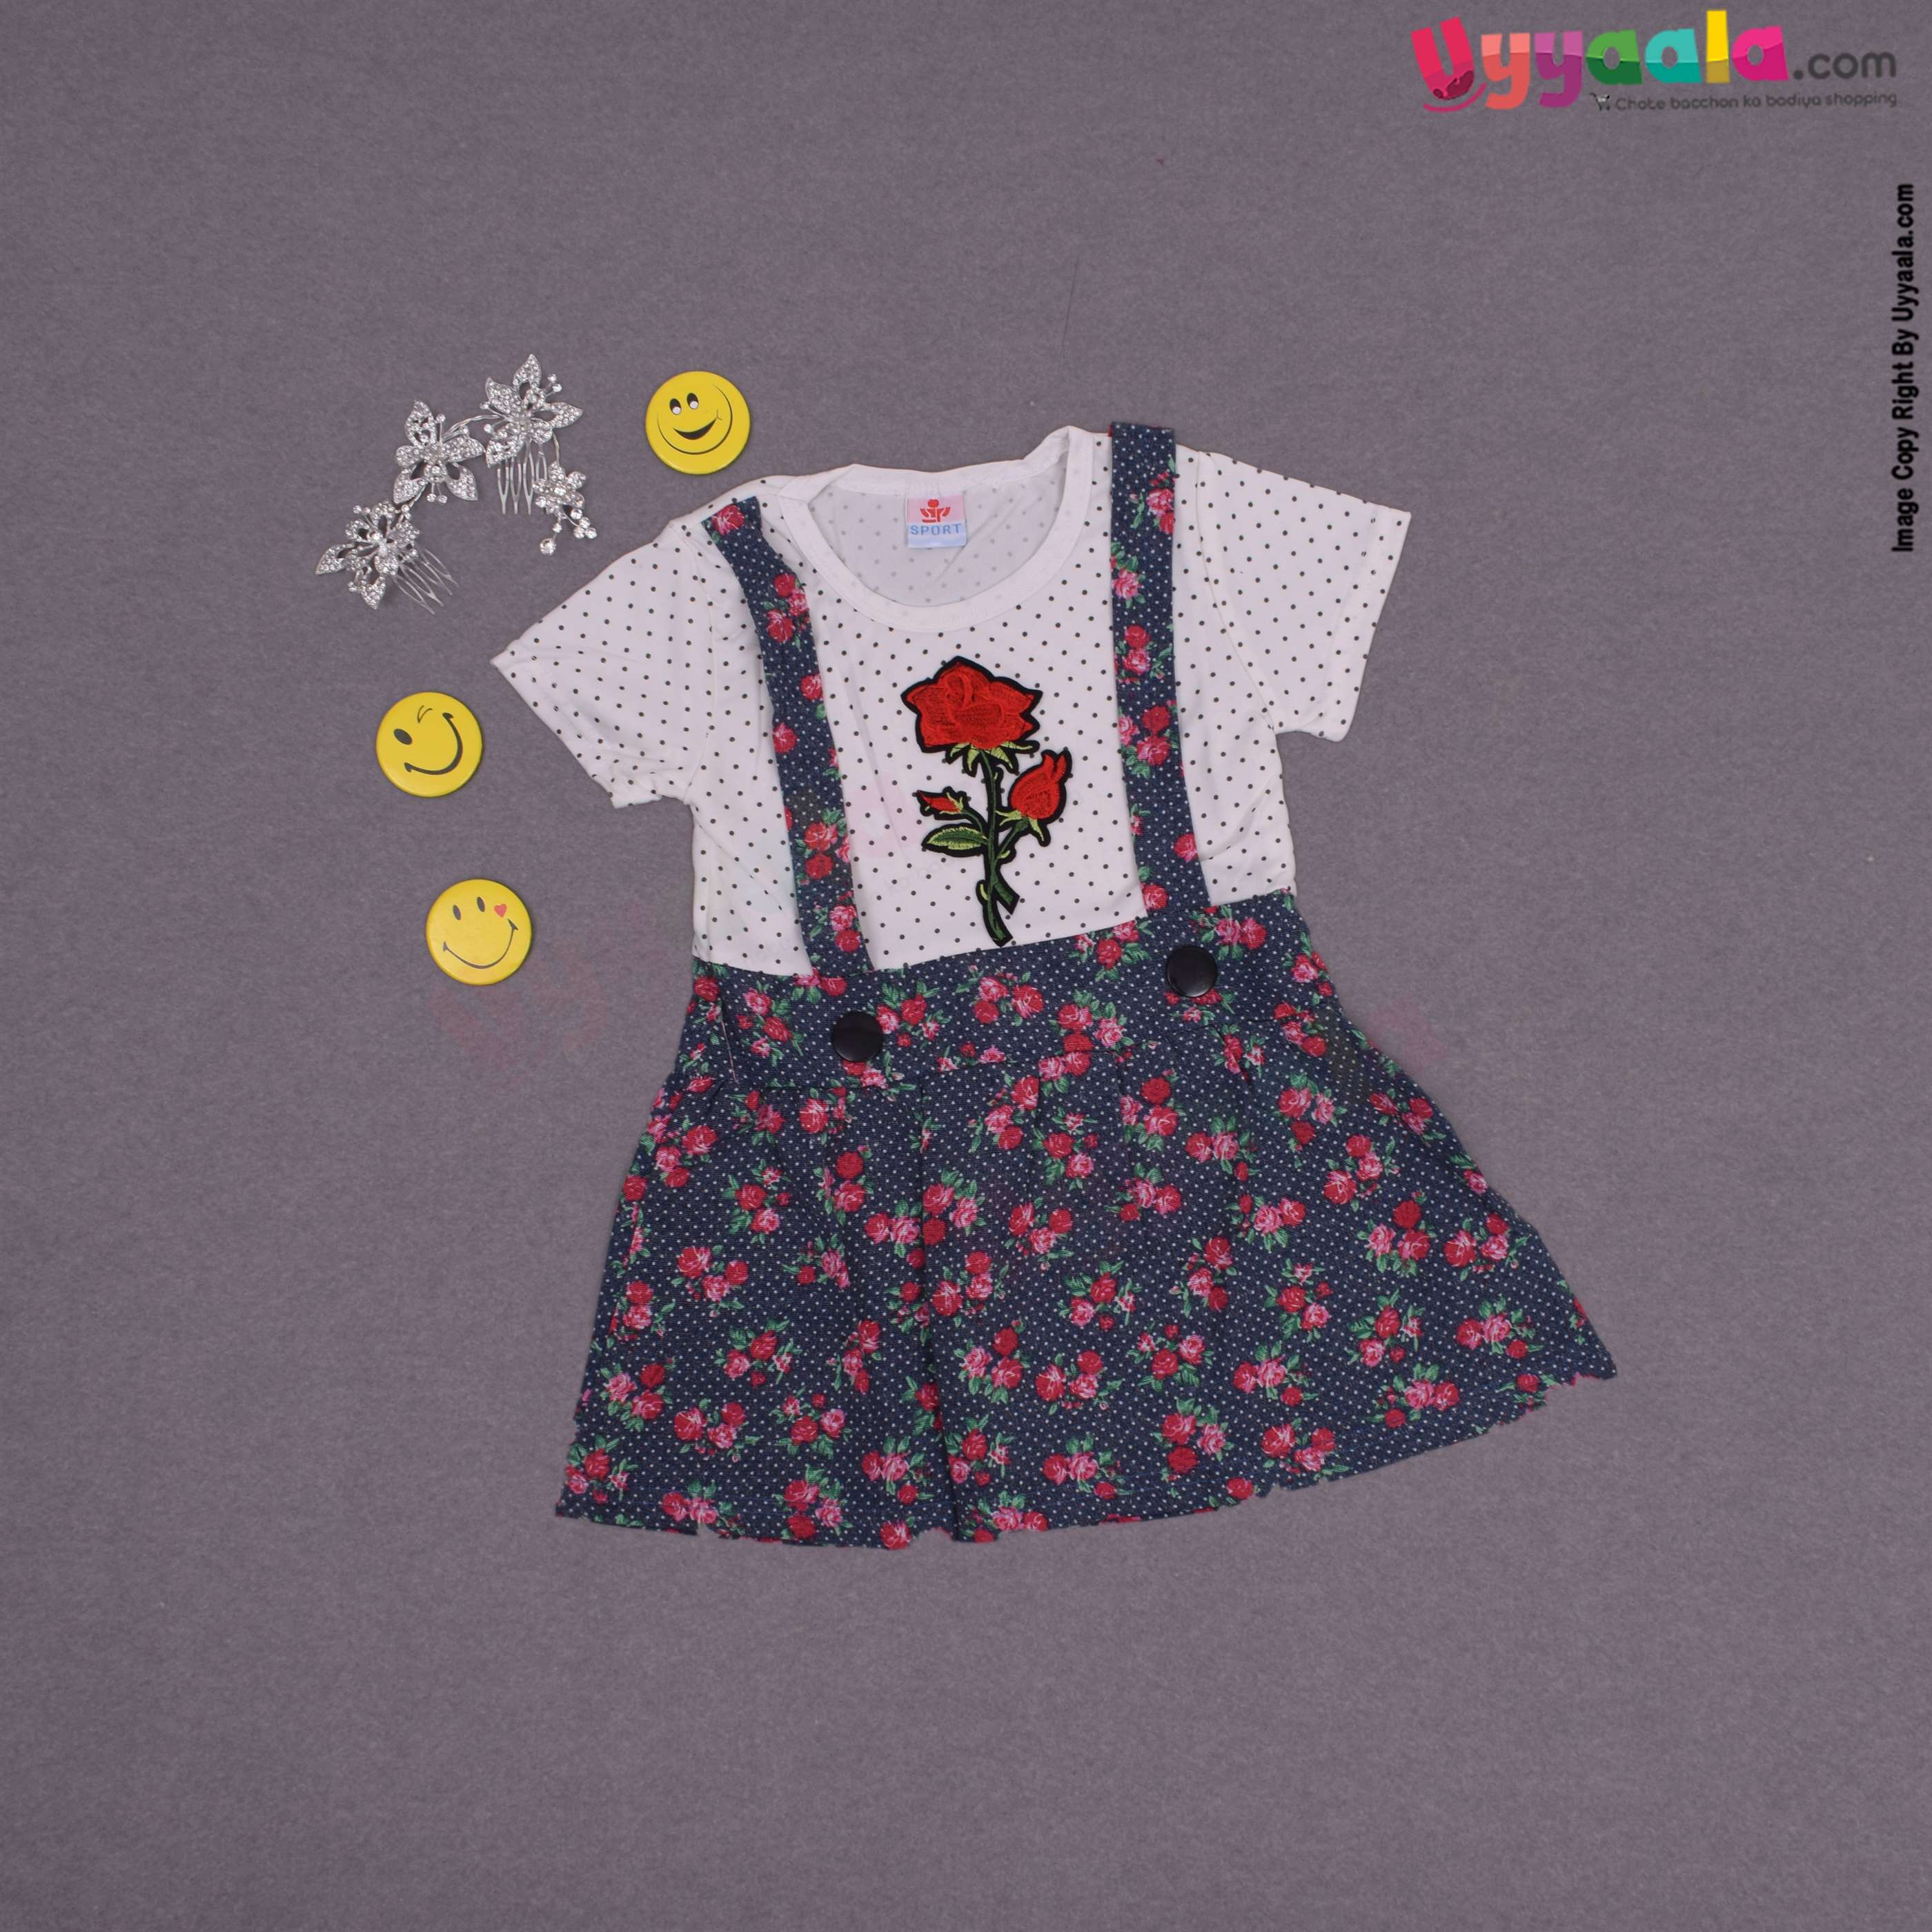 SPORT Party wear frock for baby girl with flower patch- white and navy blue